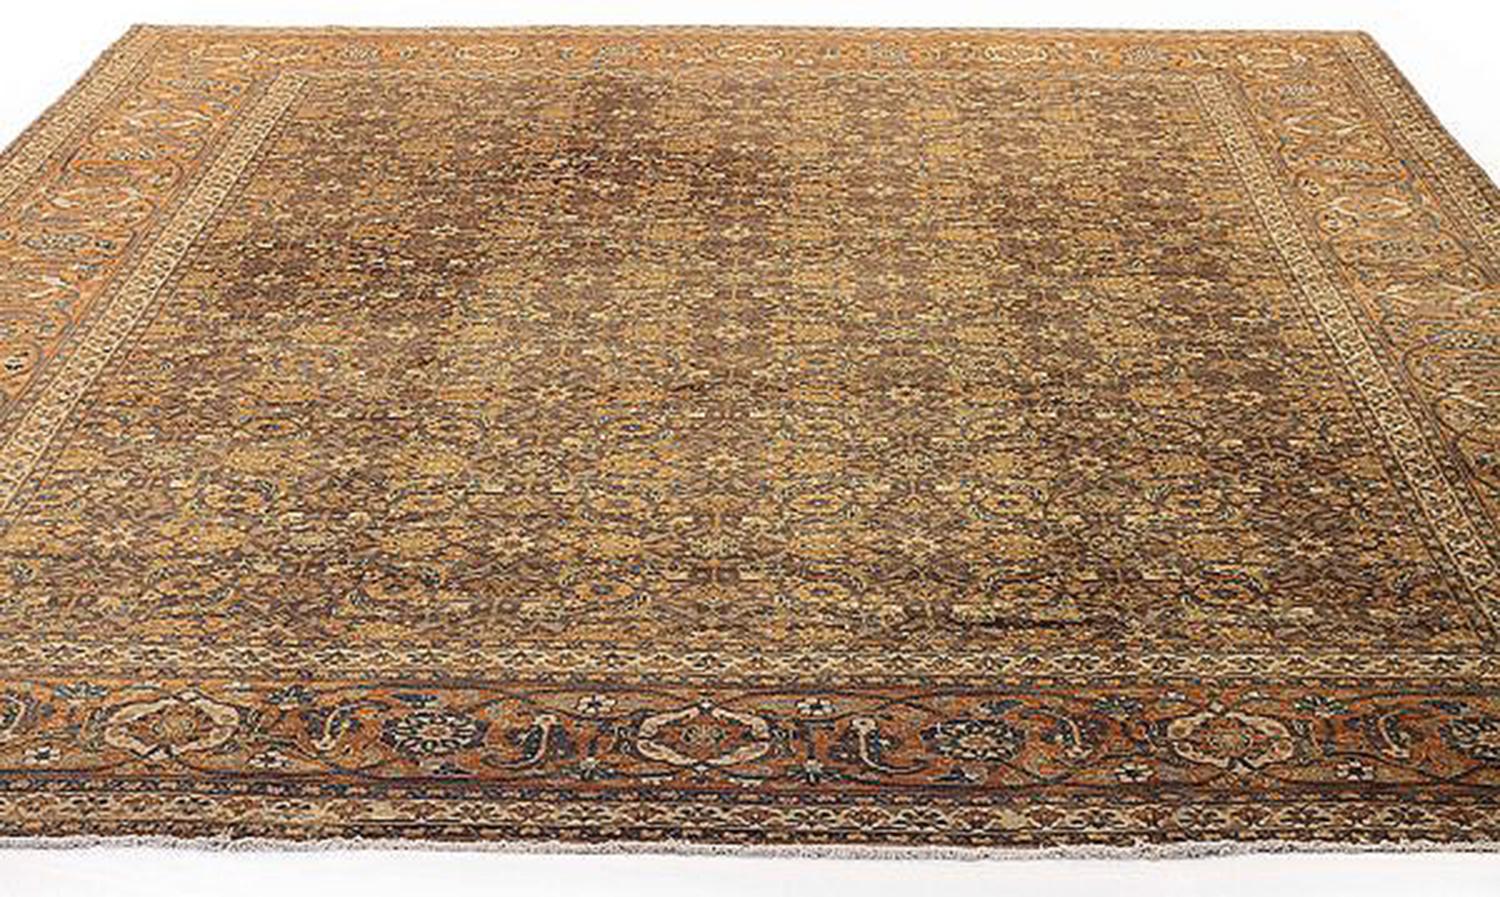 Early 20th Century 1910 Antique Persian Tabriz Rug with Beige & Rust Flower Details on Brown Field For Sale